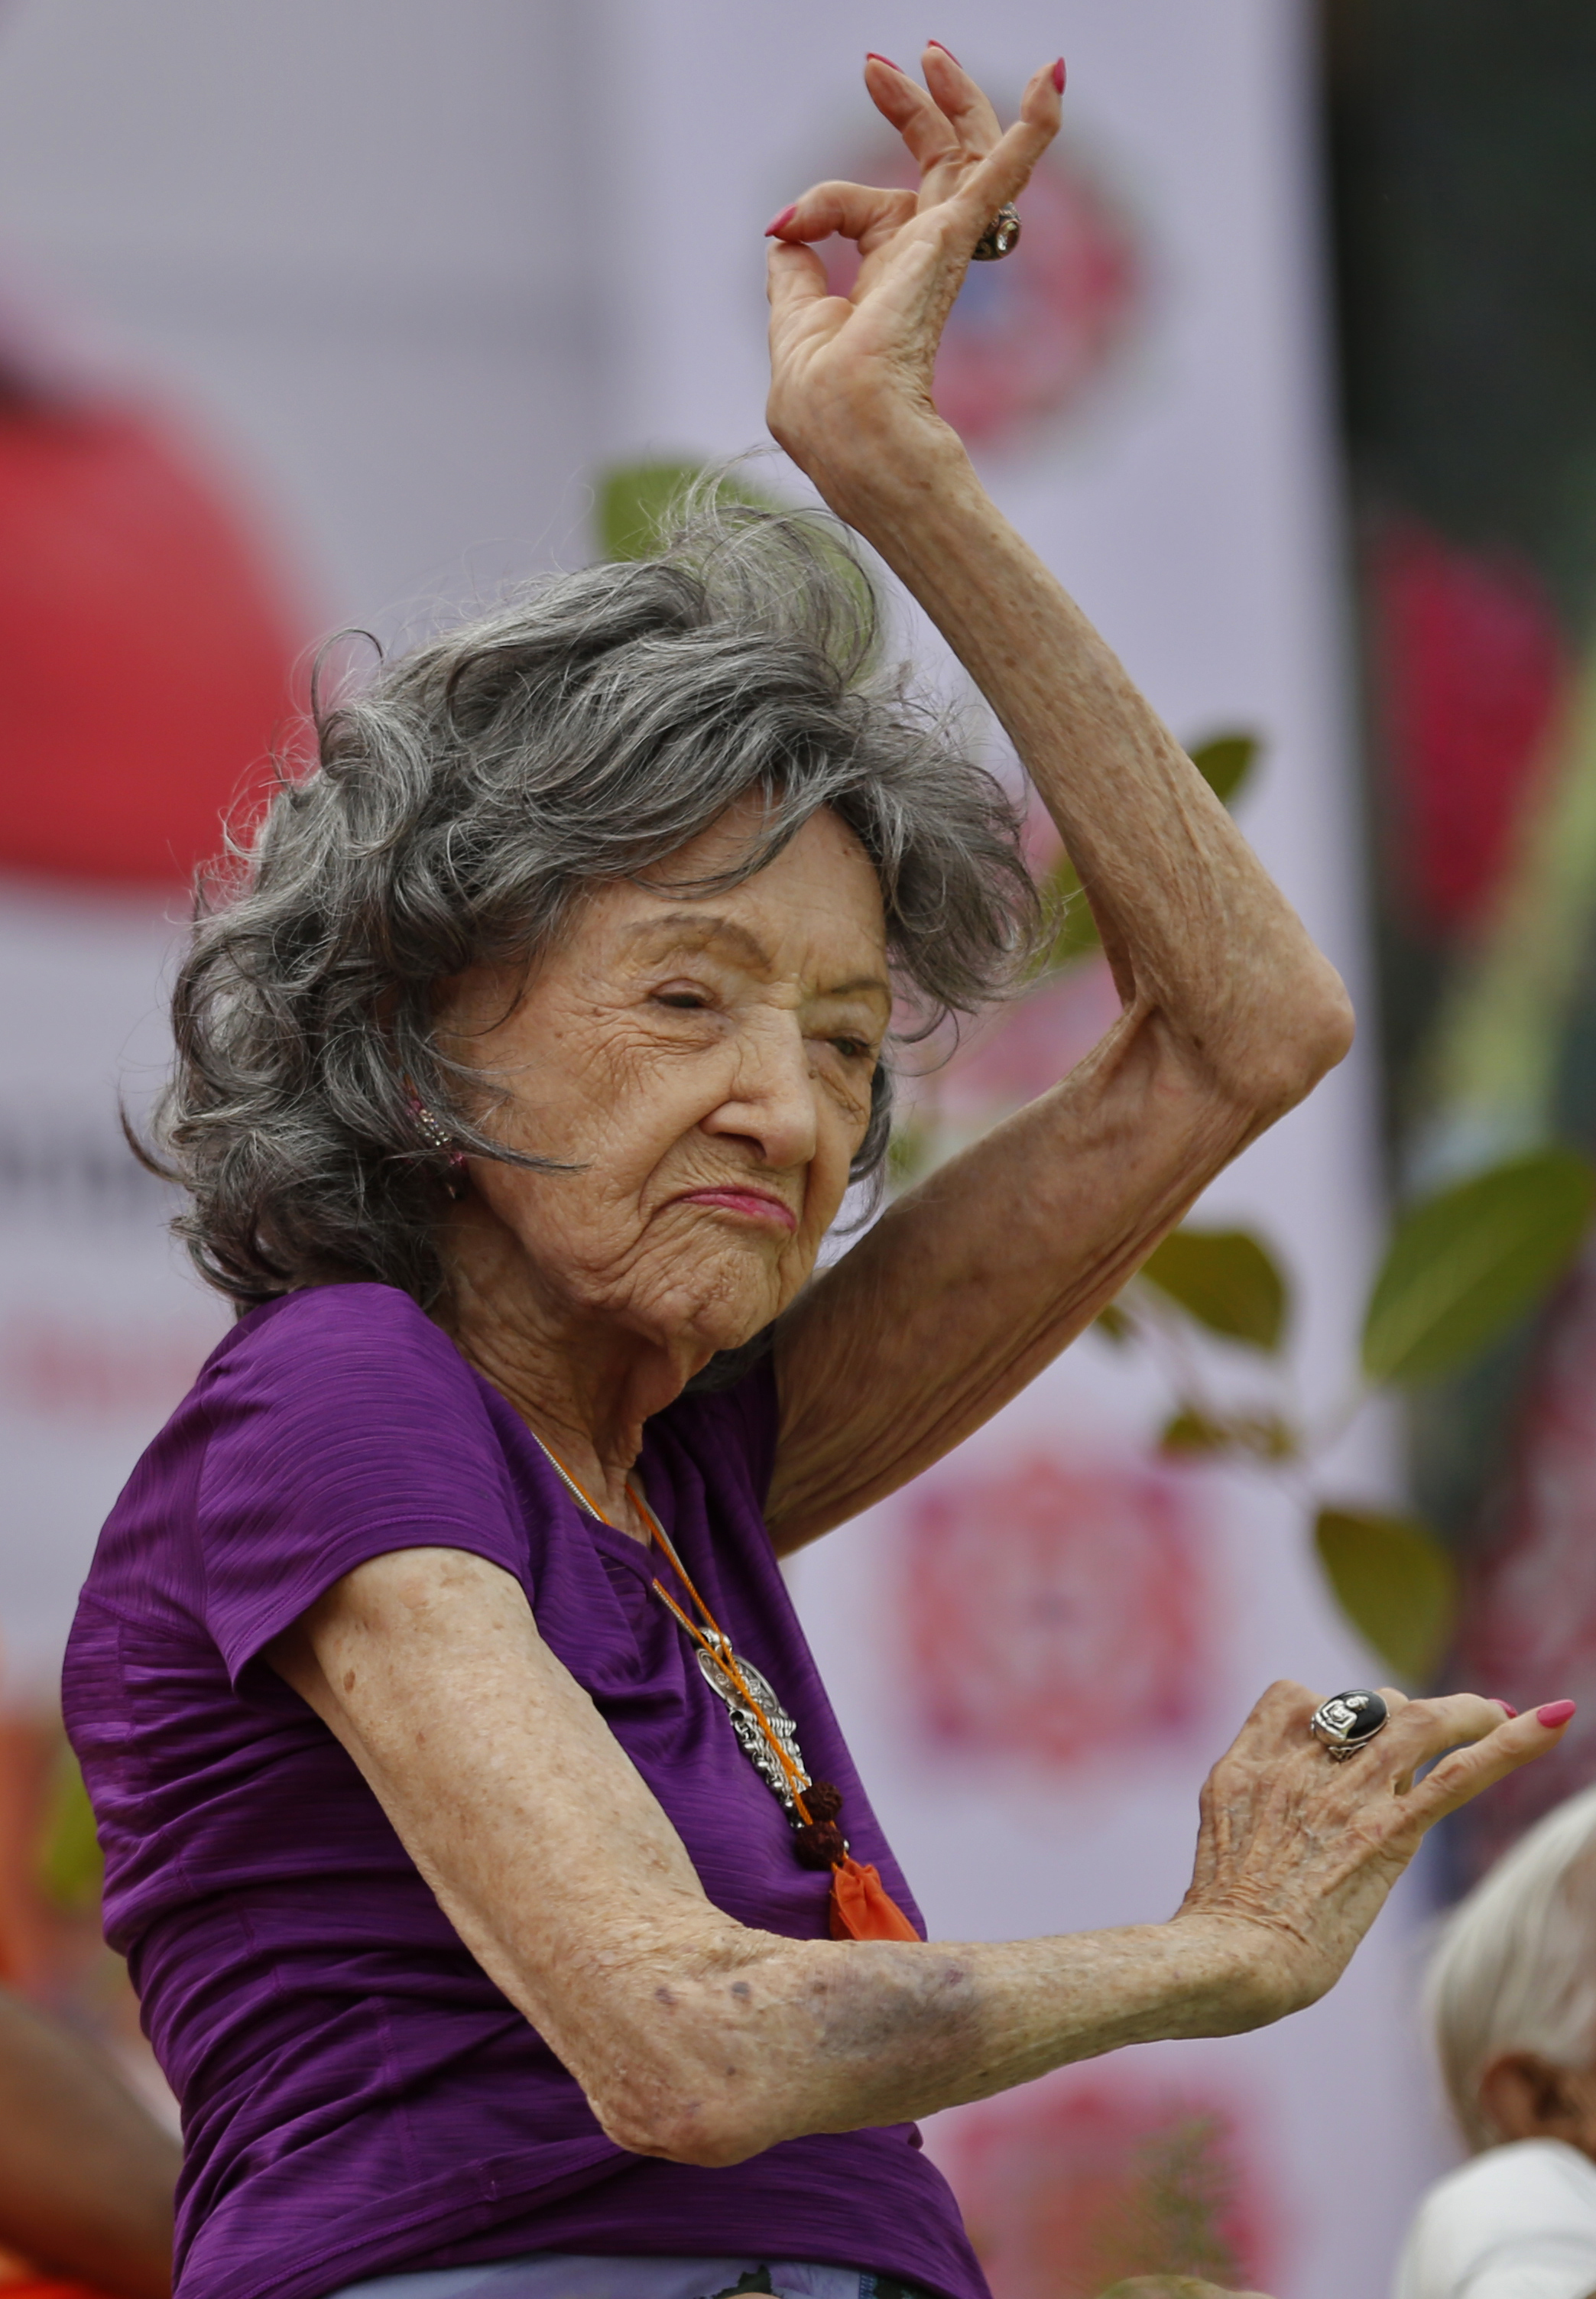 Yoga instructor, Tao Porchon-Lynch, 98, performs at a function to mark International Yoga Day in Bangalore, India, Wednesday, June 21, 2017. Yoga practitioners took a relaxing break to bend, twist and pose Wednesday morning for the annual event celebrating the practice, especially in the country where it began. (AP Photo/Aijaz Rahi)